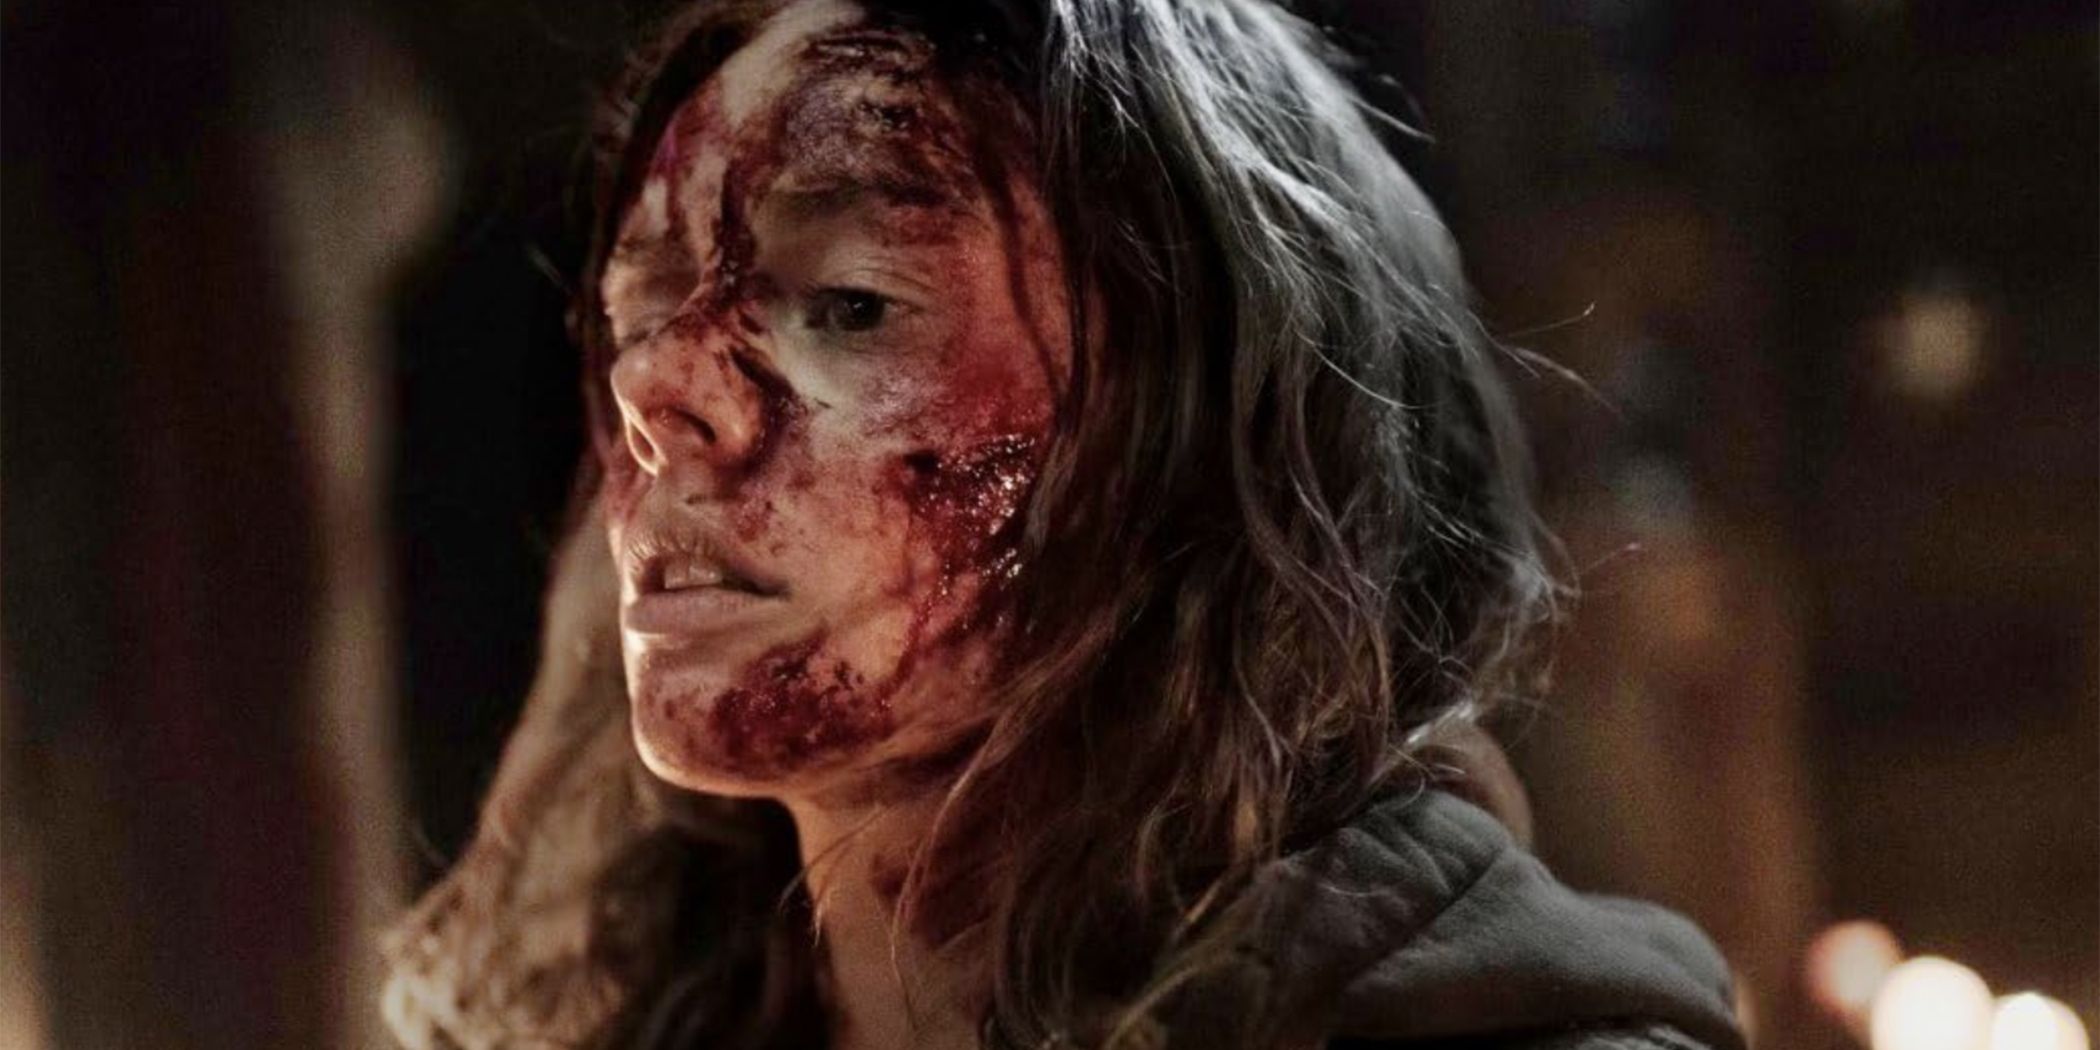 A close-up of Samara Weaving covered in blood